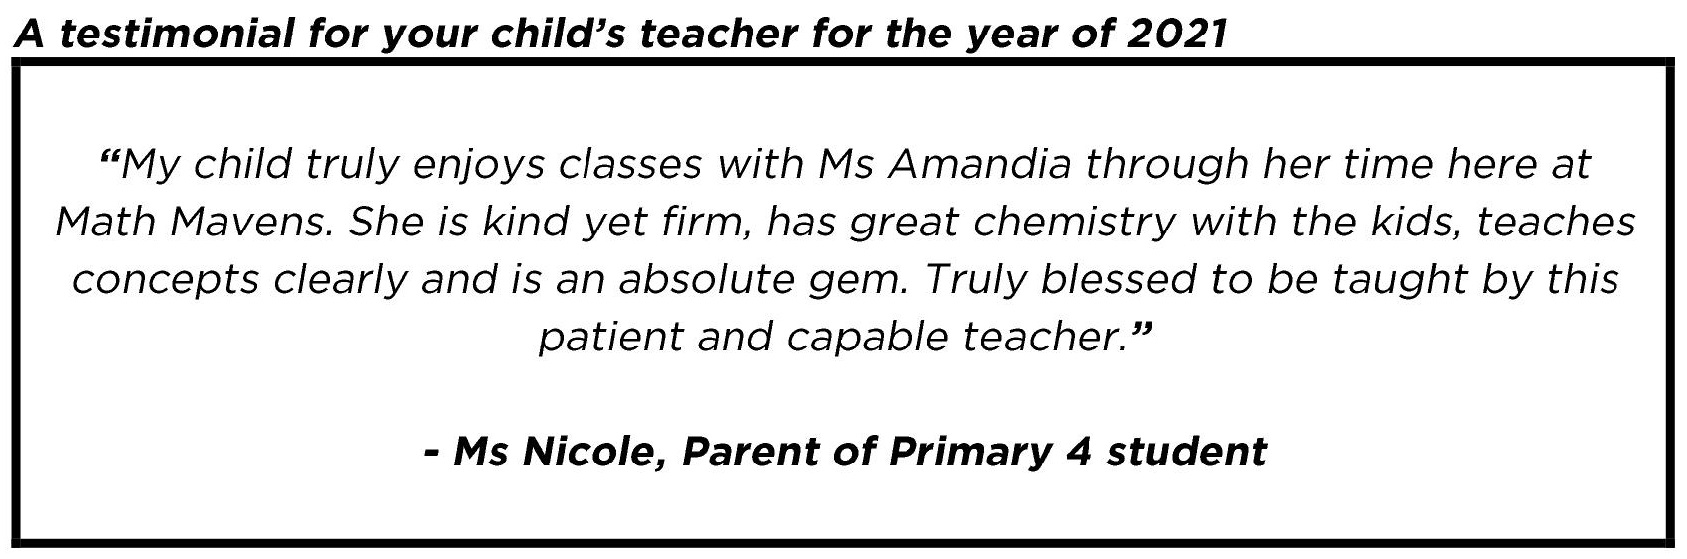 "Truly blessed to be taught by this patient and capable teacher."